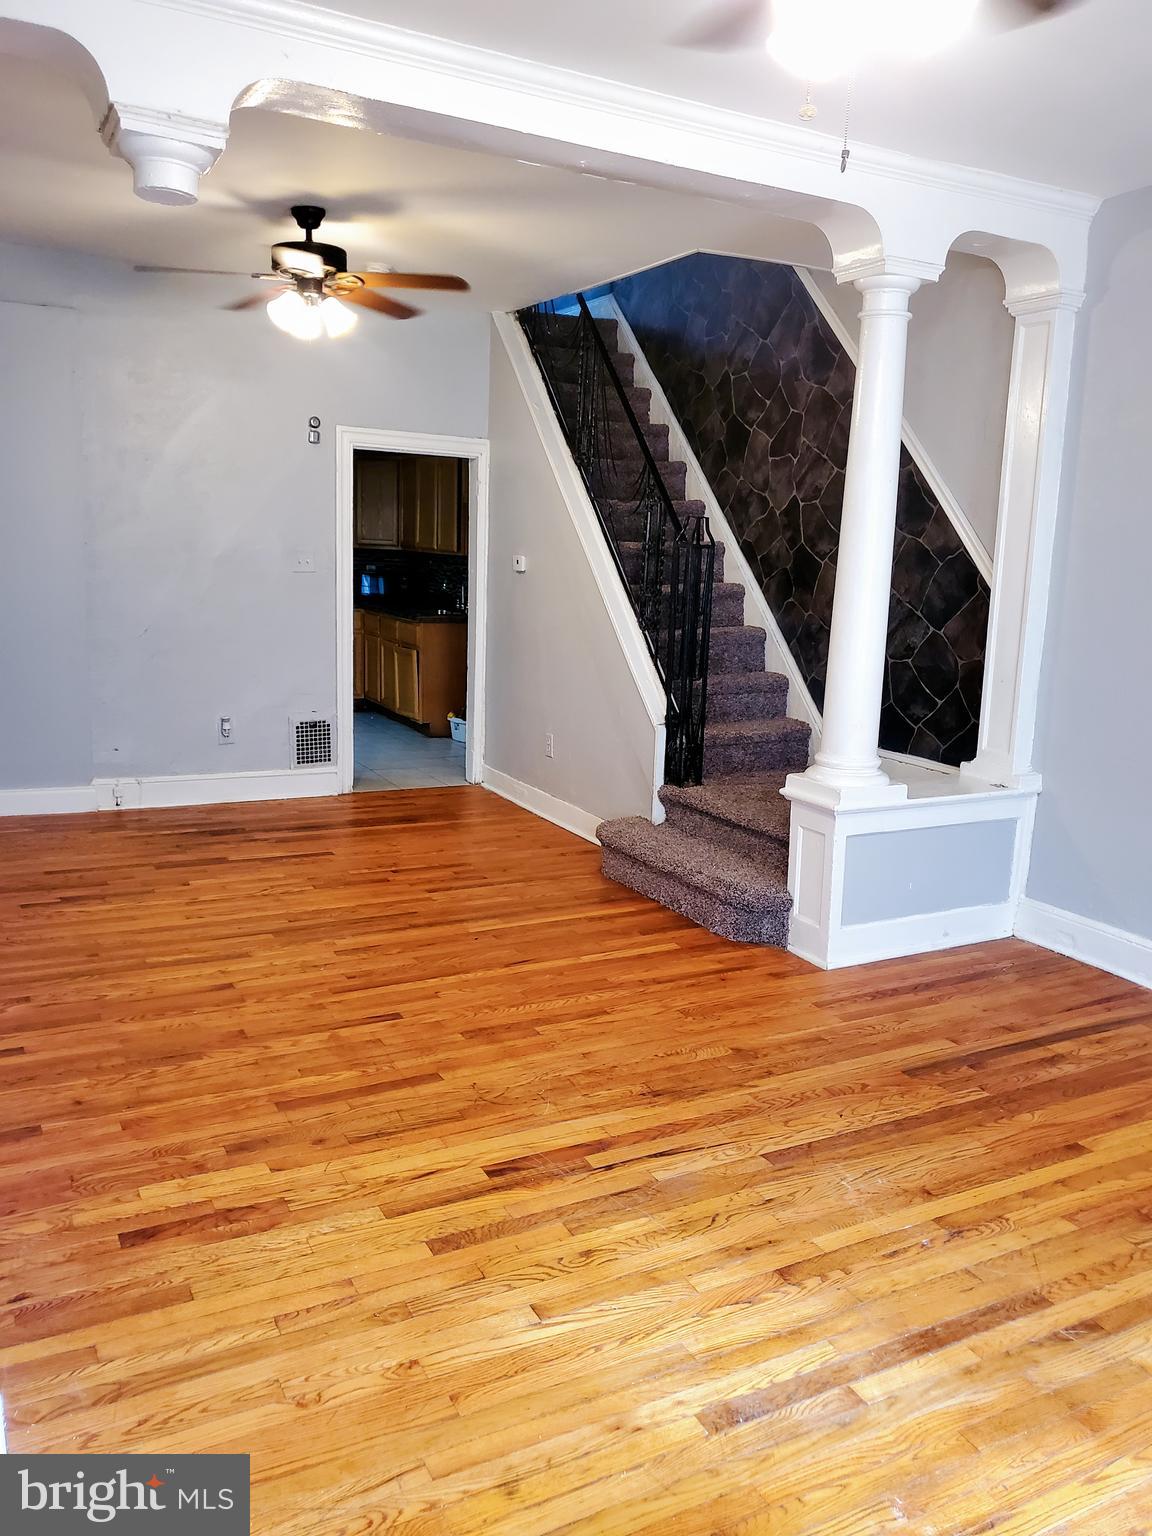 a view of an empty room with wooden floor and fireplace